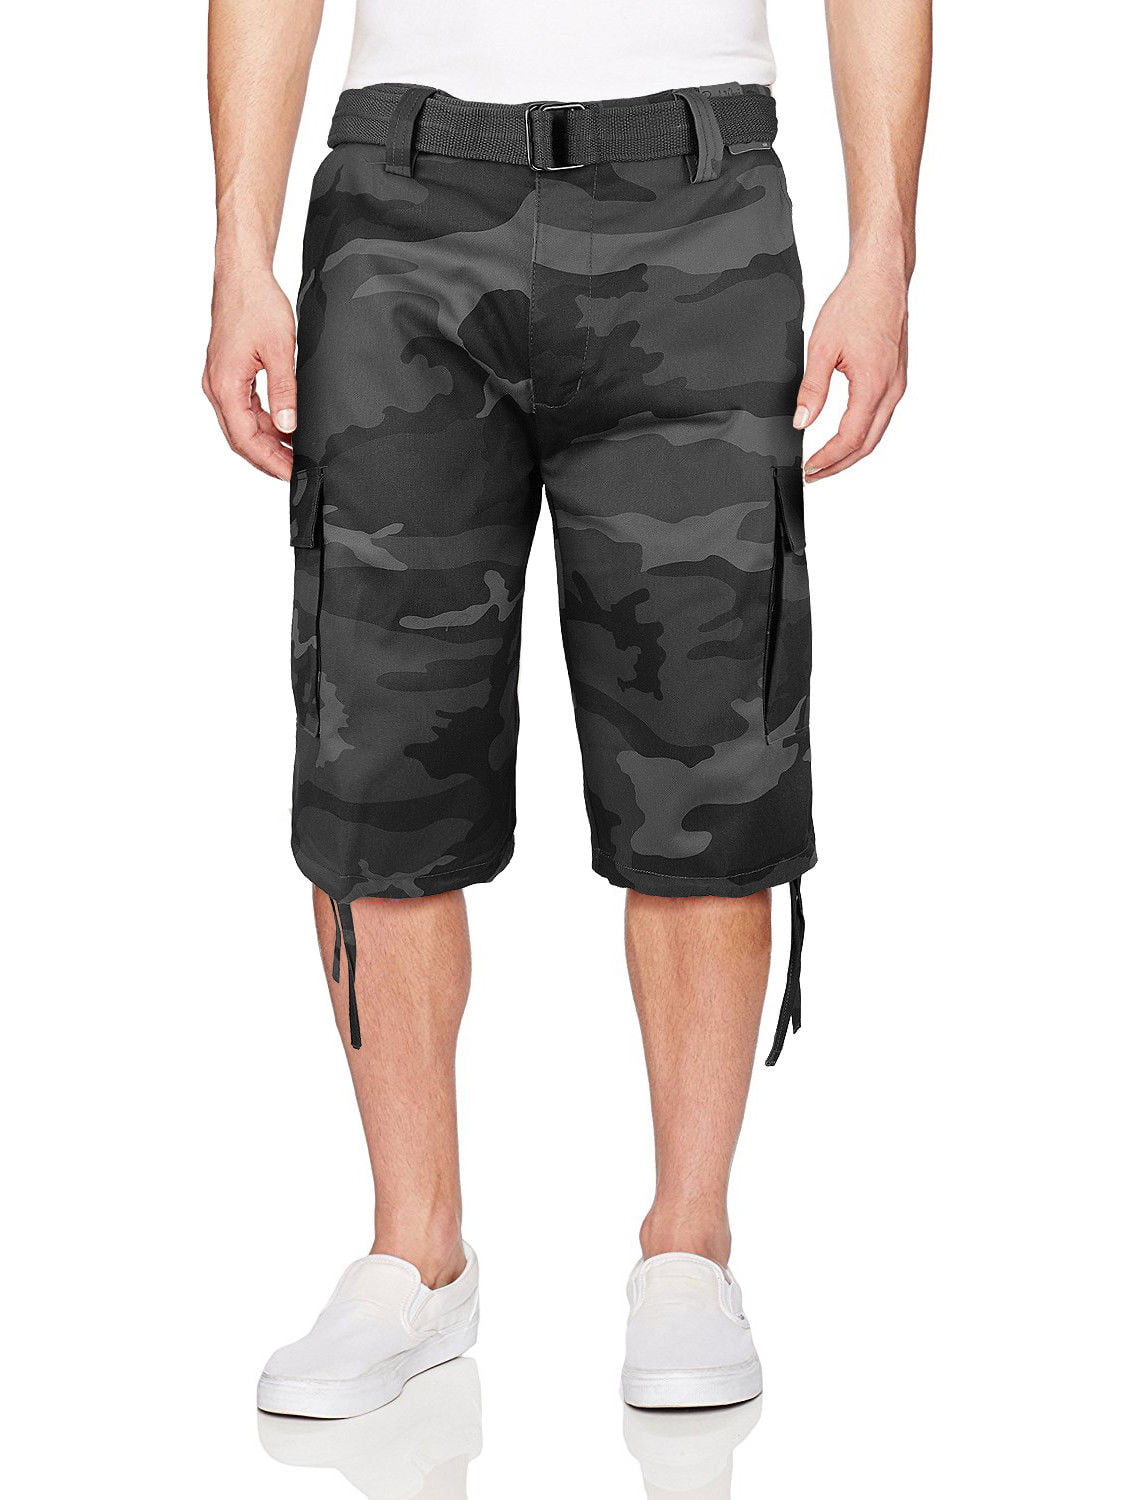 Men's Tactical Military Army Camo Camouflage Slim Fit Cargo Shorts With Belt 